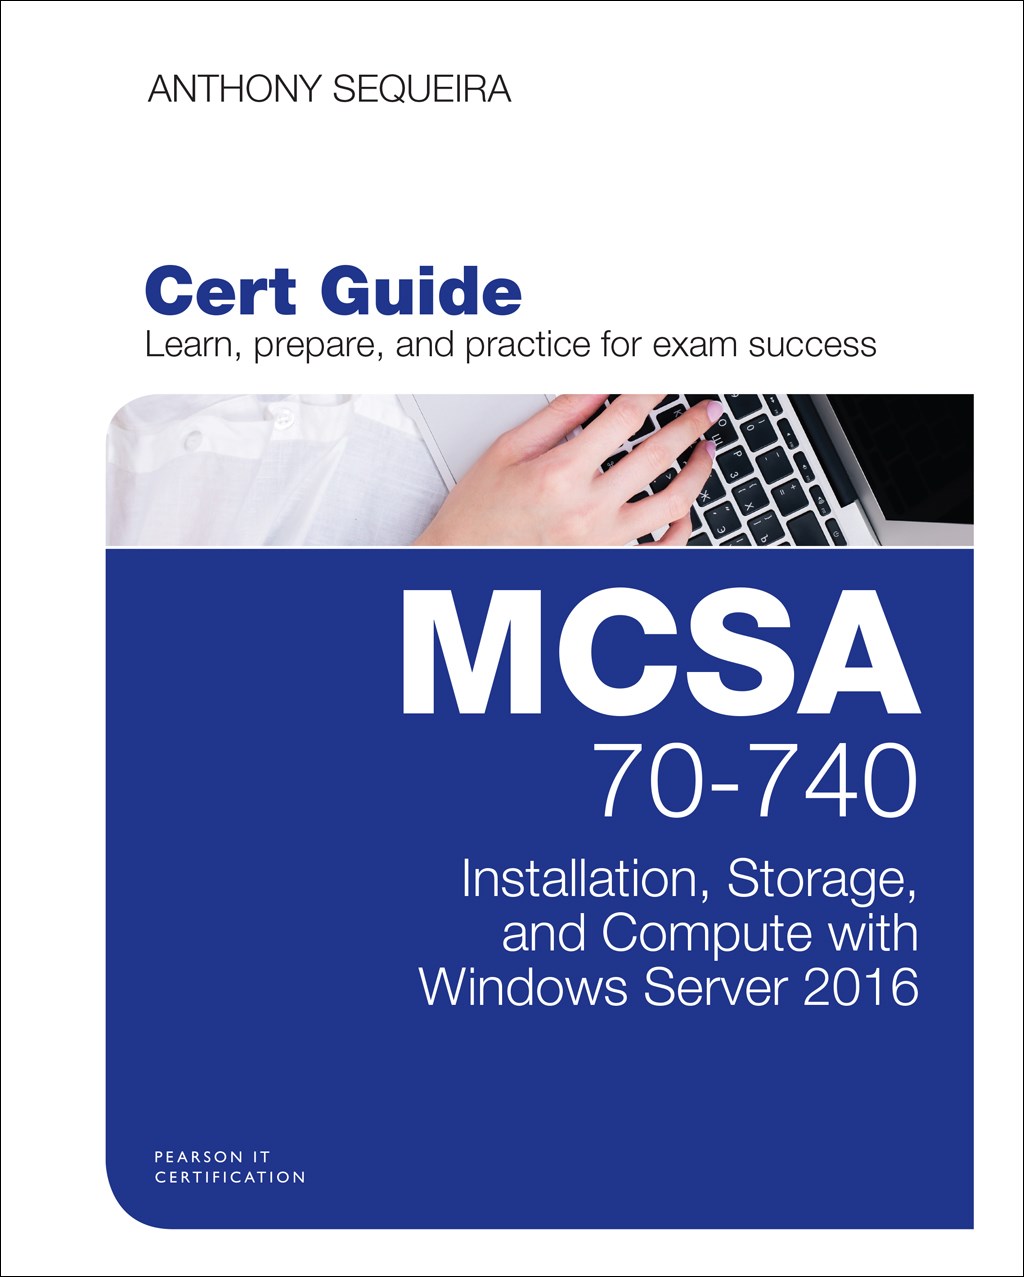 MCSA 70-740 Cert Guide,Rough Cuts: Installation, Storage, and Compute with Windows Server 2016